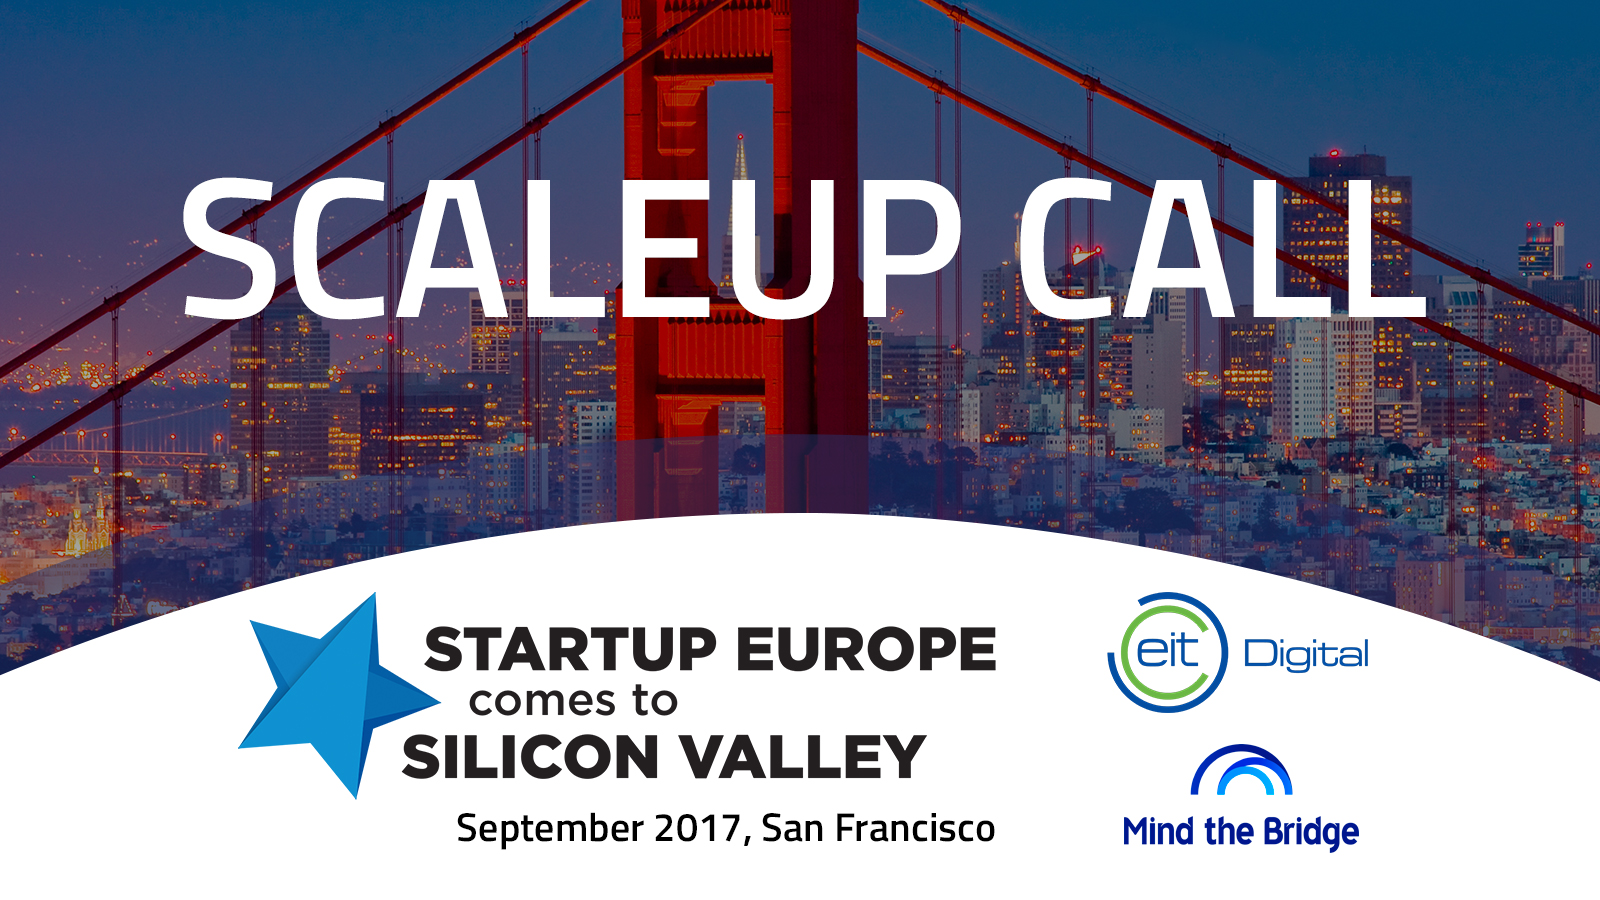 Scaleup Call - Startup Europe comes to Silicon Valley